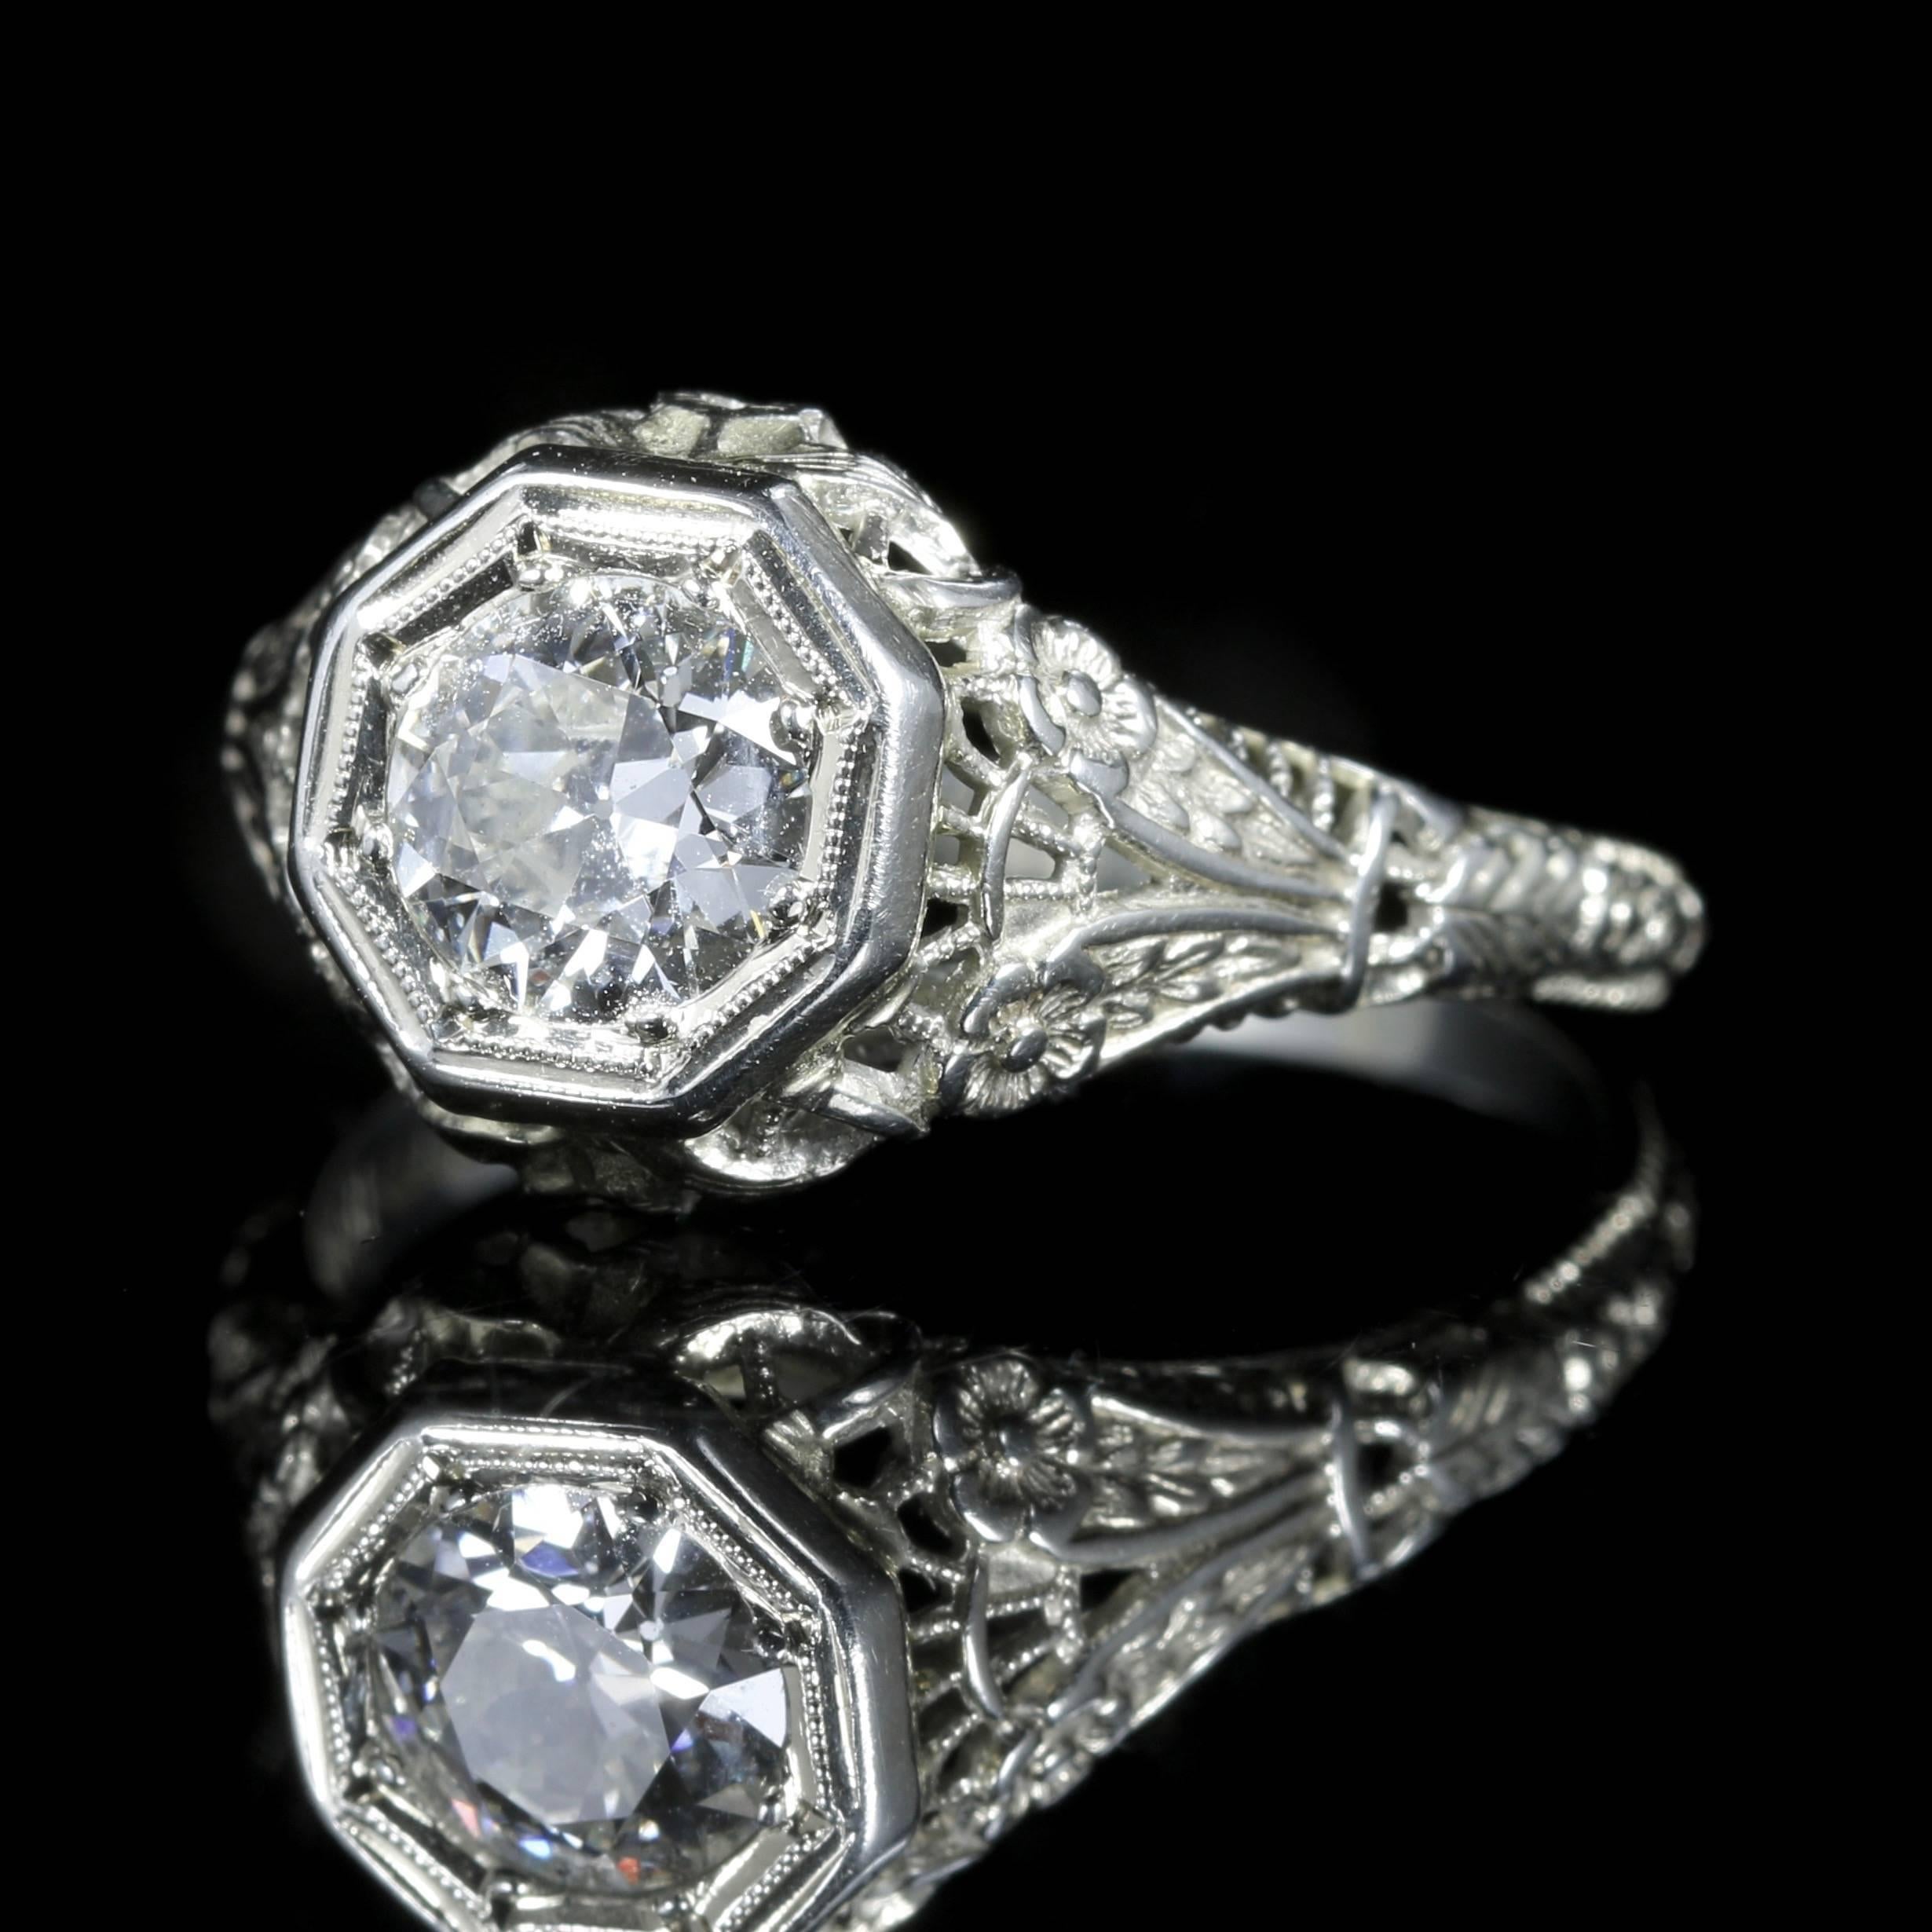 This stunning Diamond 18ct White Gold ring is genuine 1920s set in a lovely Art Deco gallery that is all original.

The central Diamond is 1.10ct set in a beautiful decorative gallery.

The large central solitaire is SI2 H/I Colour which is set into